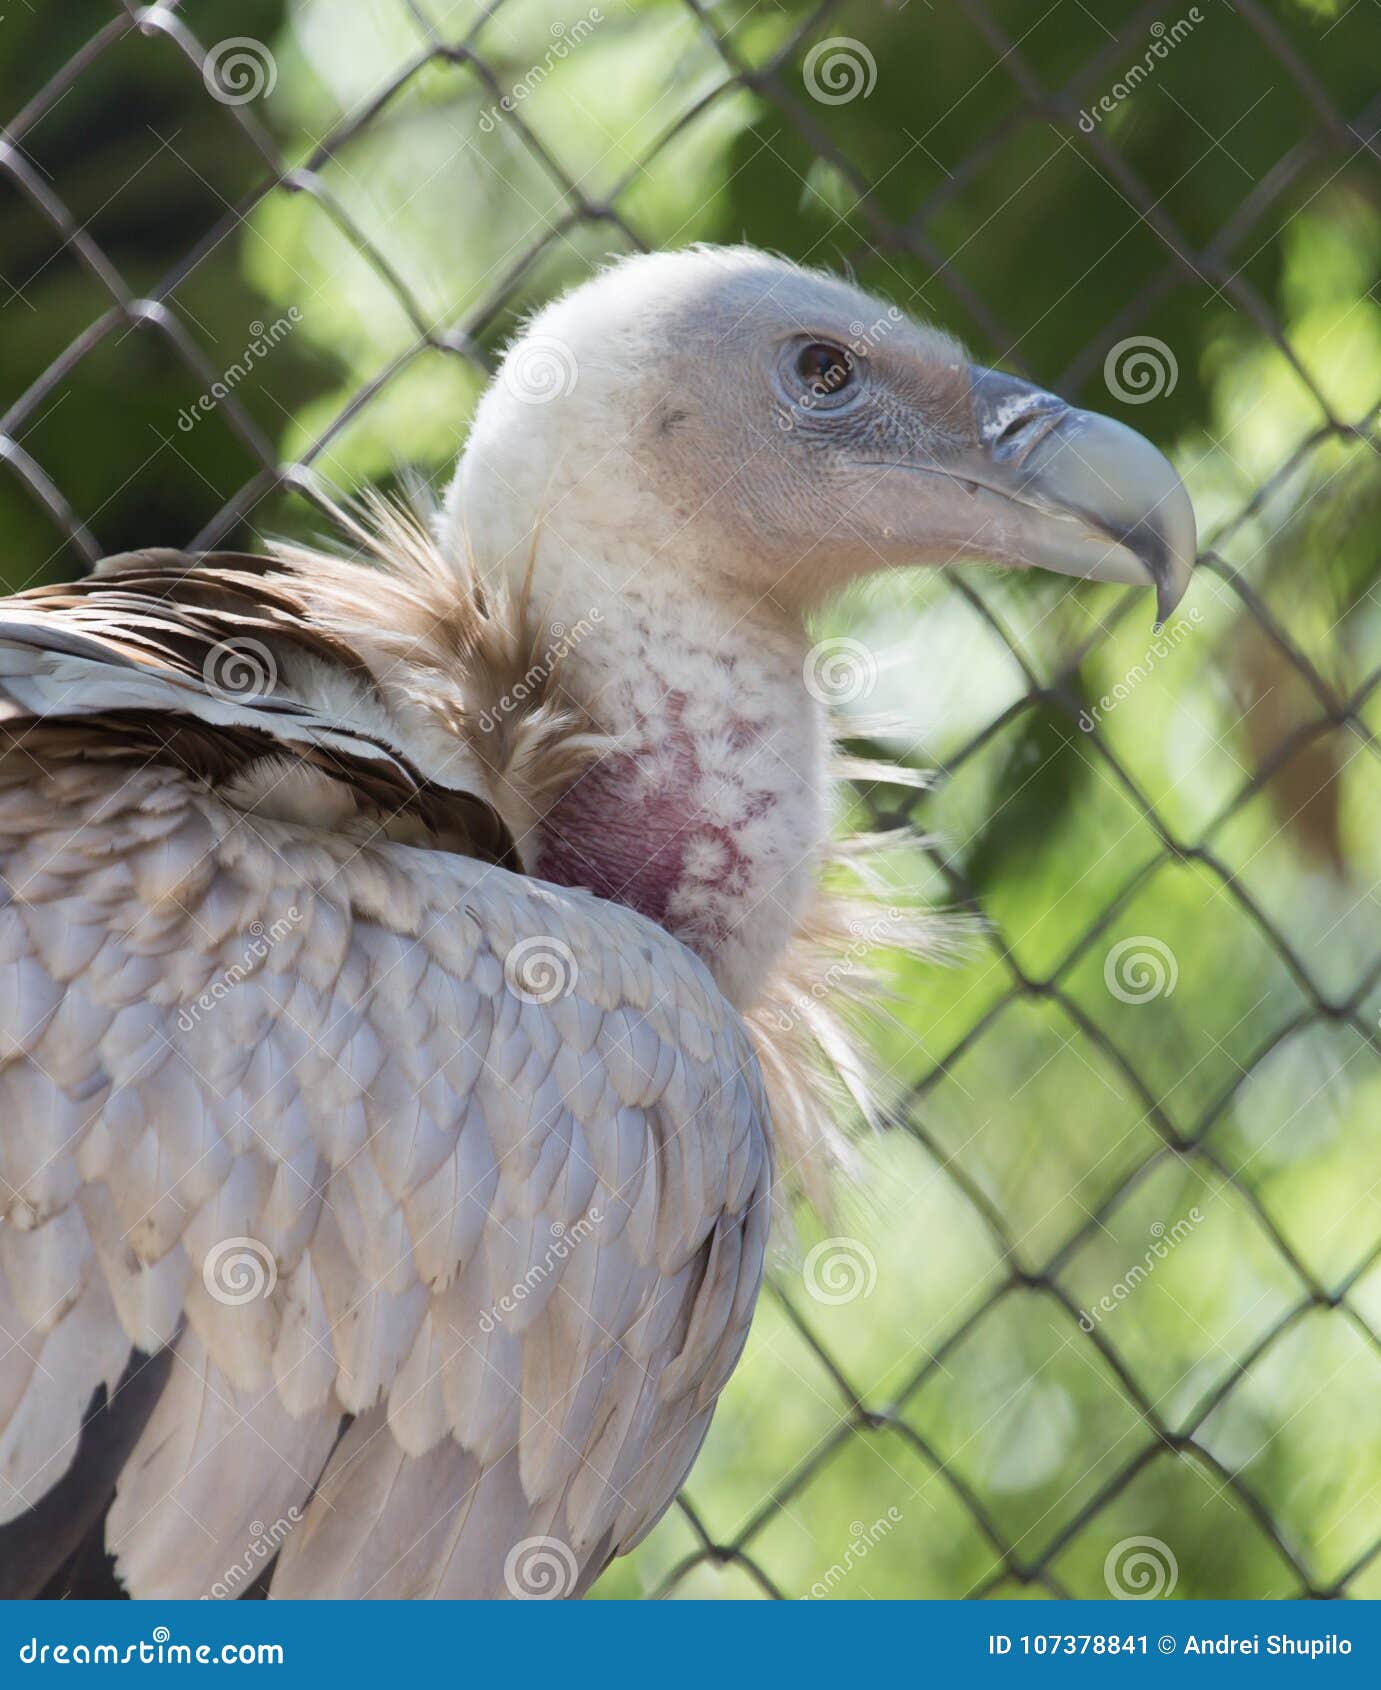 Portrait of a Vulture in a Zoo Stock Image - Image of looking, natural ...